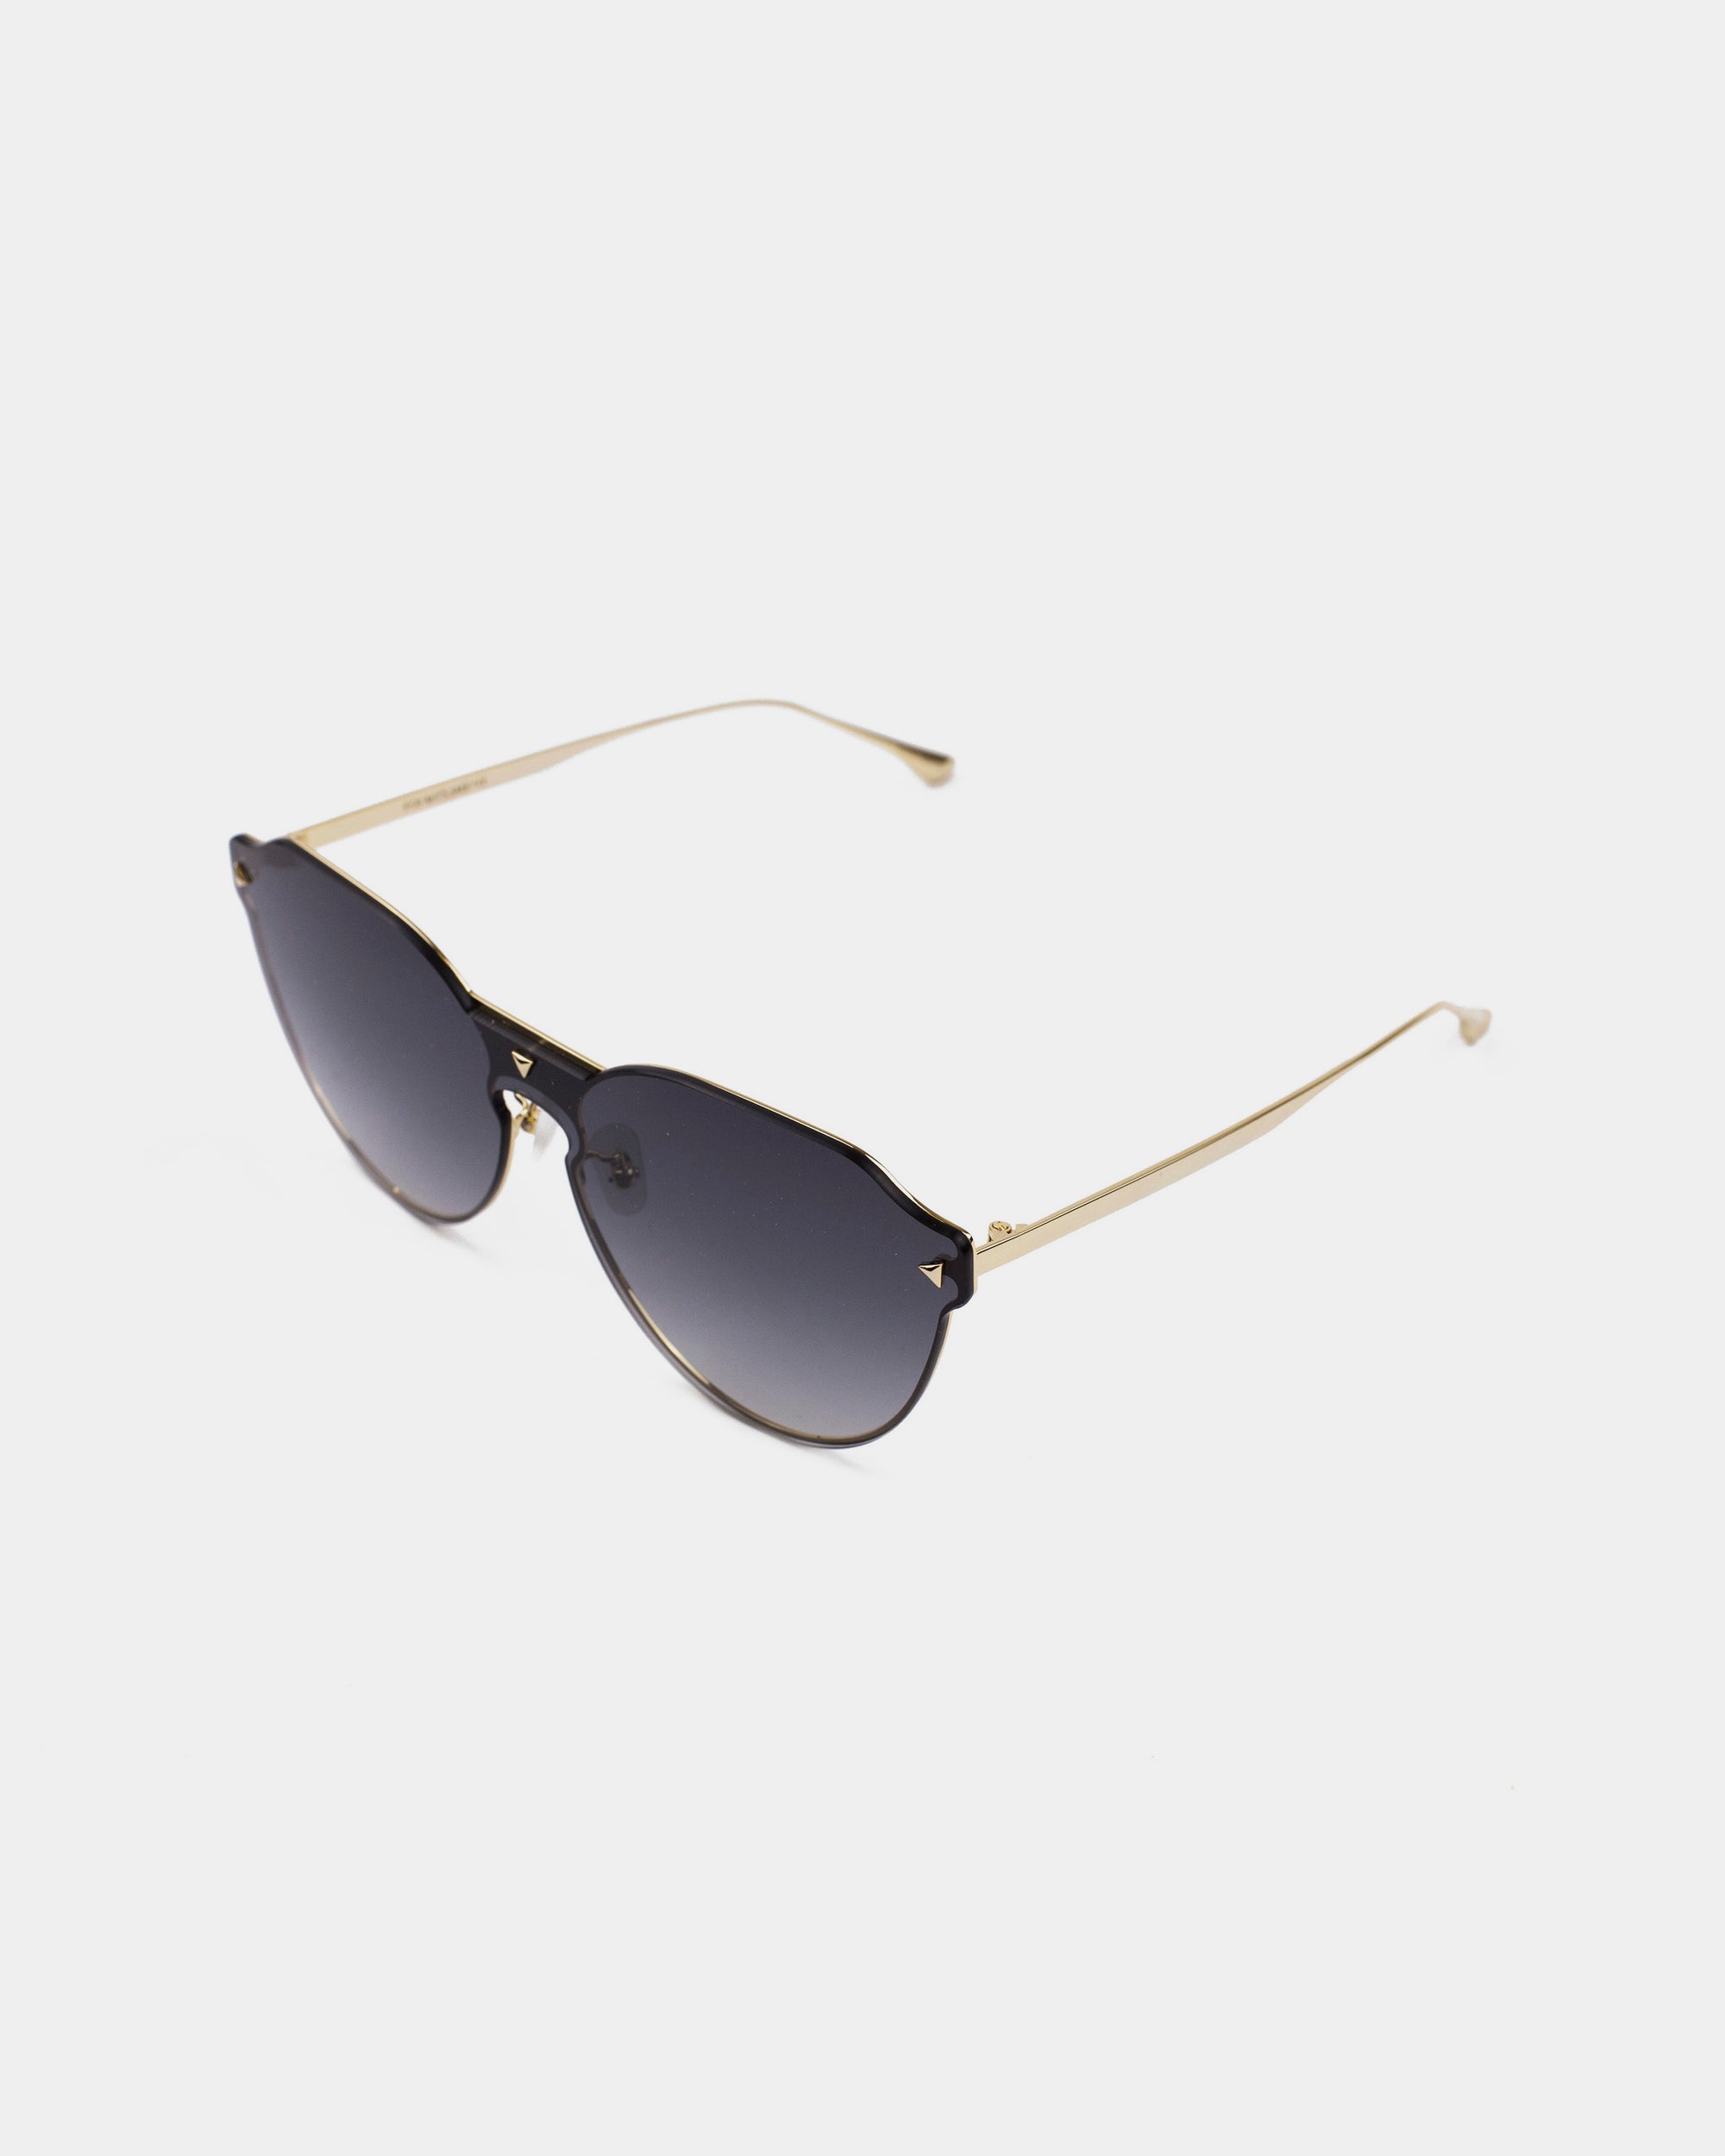 A pair of stylish sunglasses with black round nylon lenses offering UV protection, and thin, 18-karat gold-plated frames, angled slightly. The background is plain white, highlighting the sleek design and minimalist aesthetic of the Error 404 by For Art's Sake®.